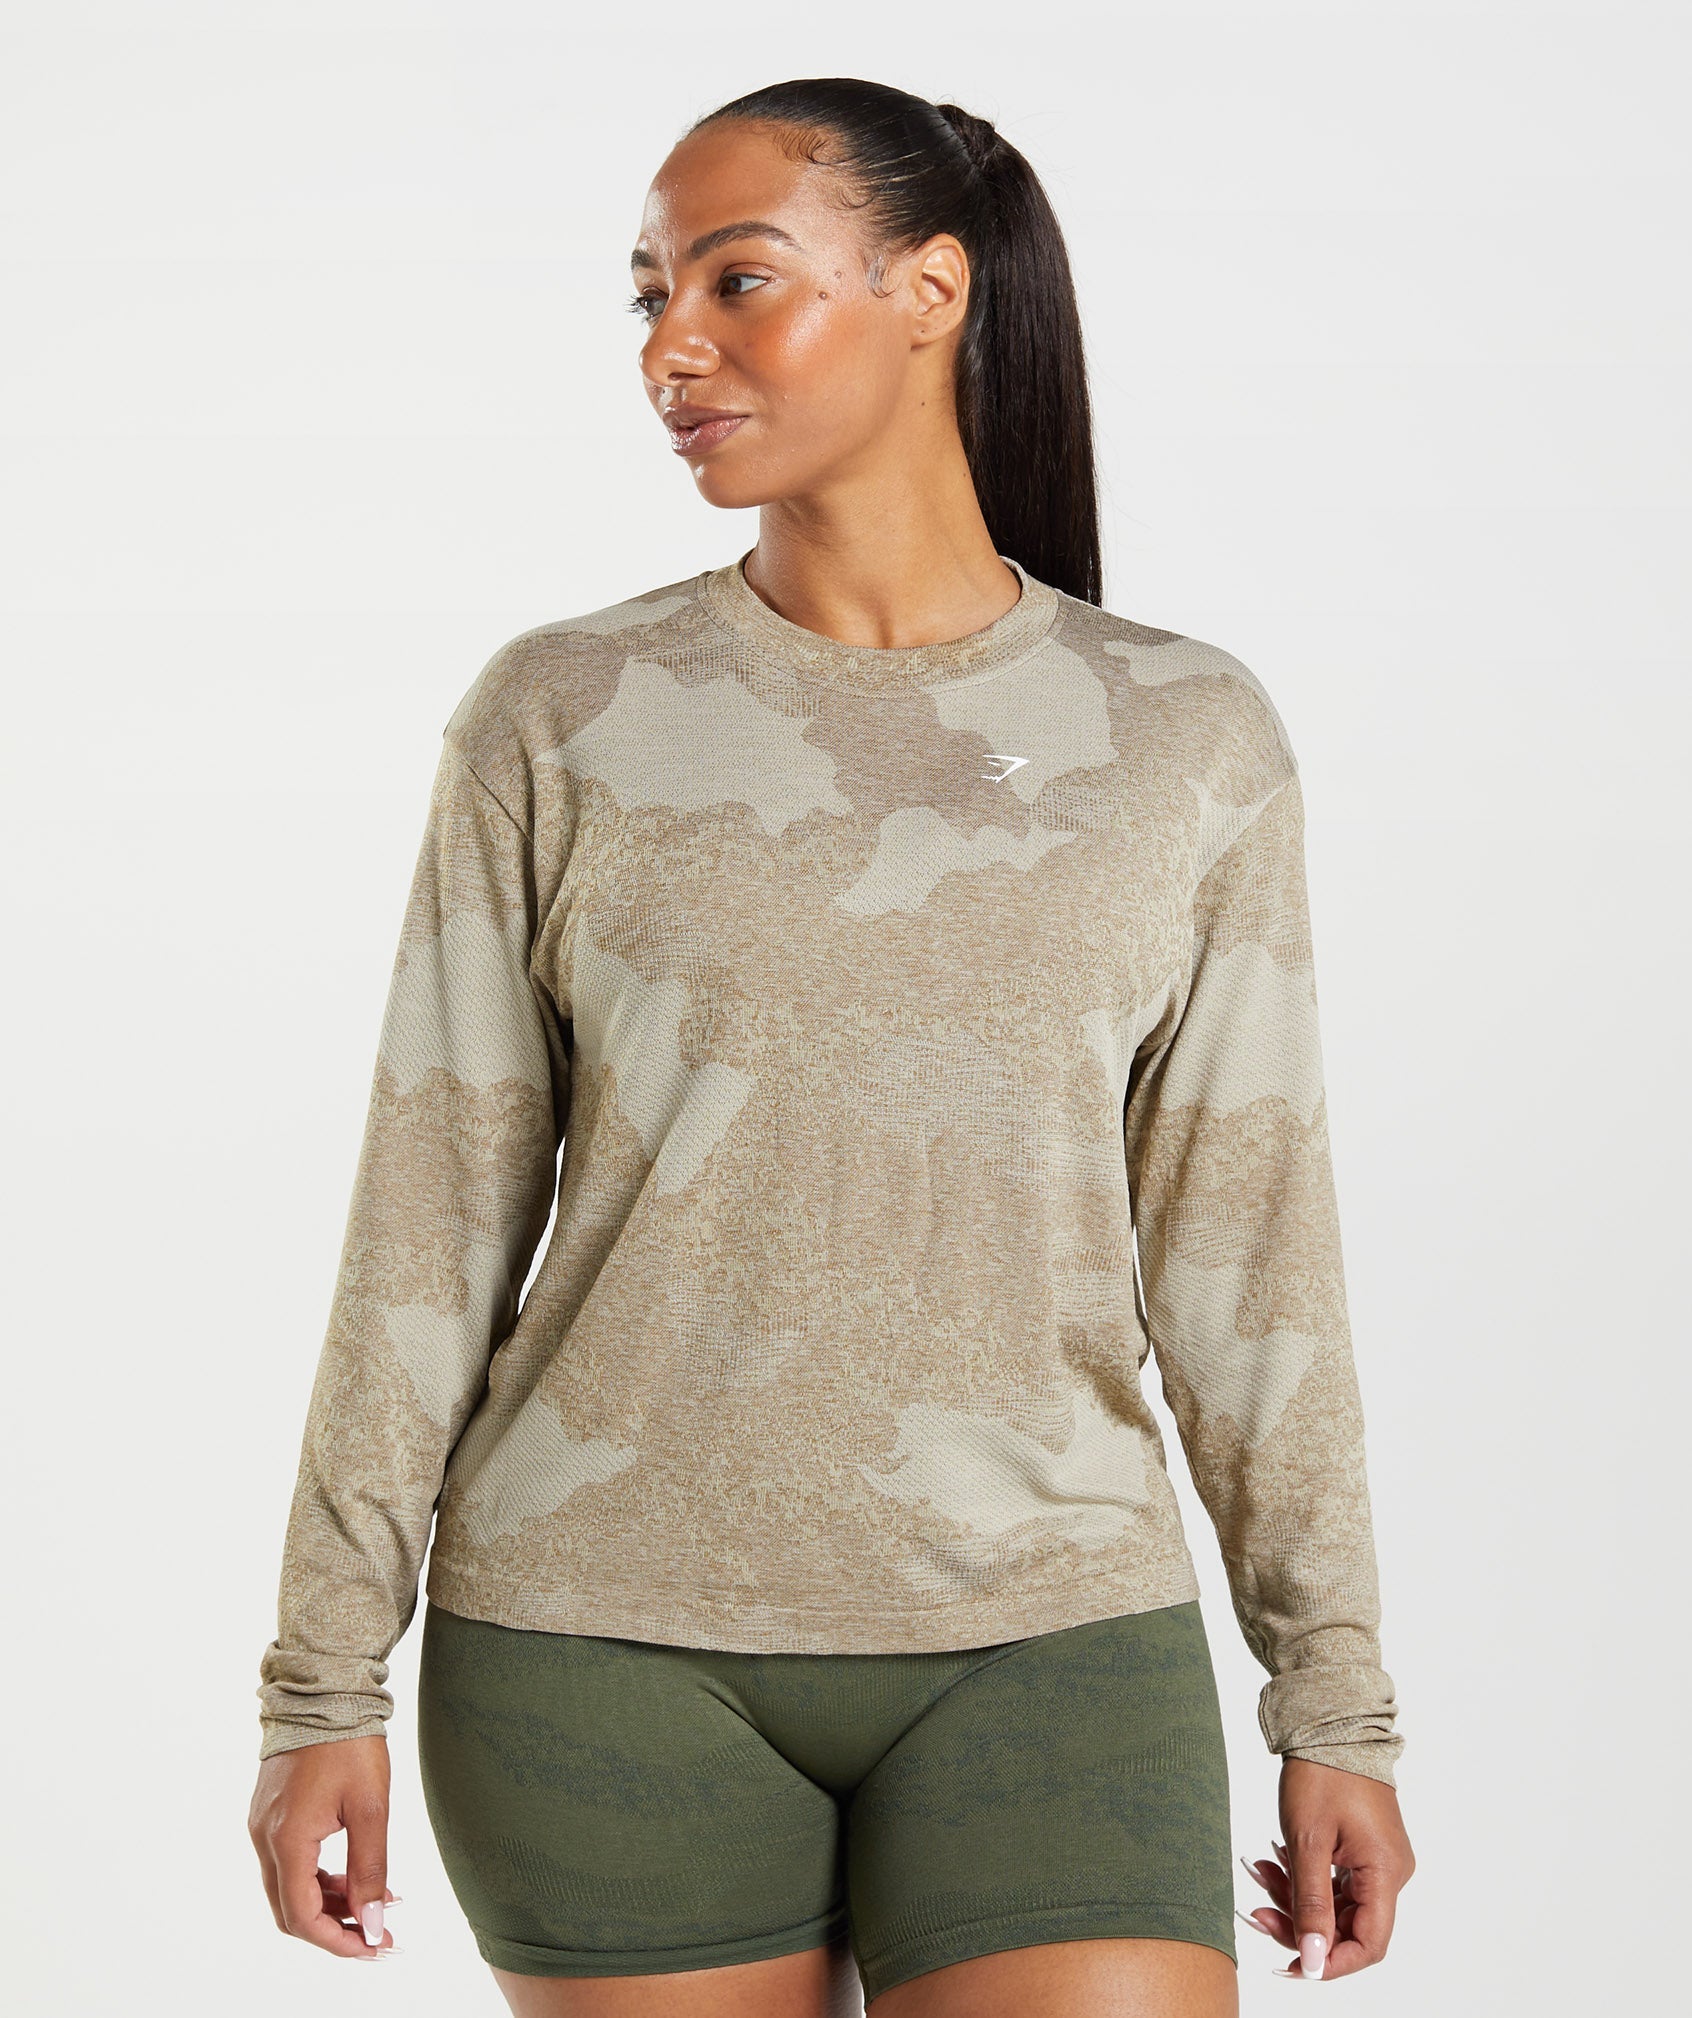 Gymshark Adapt Camo Seamless Lace Up Back Top - Moss Olive/Core